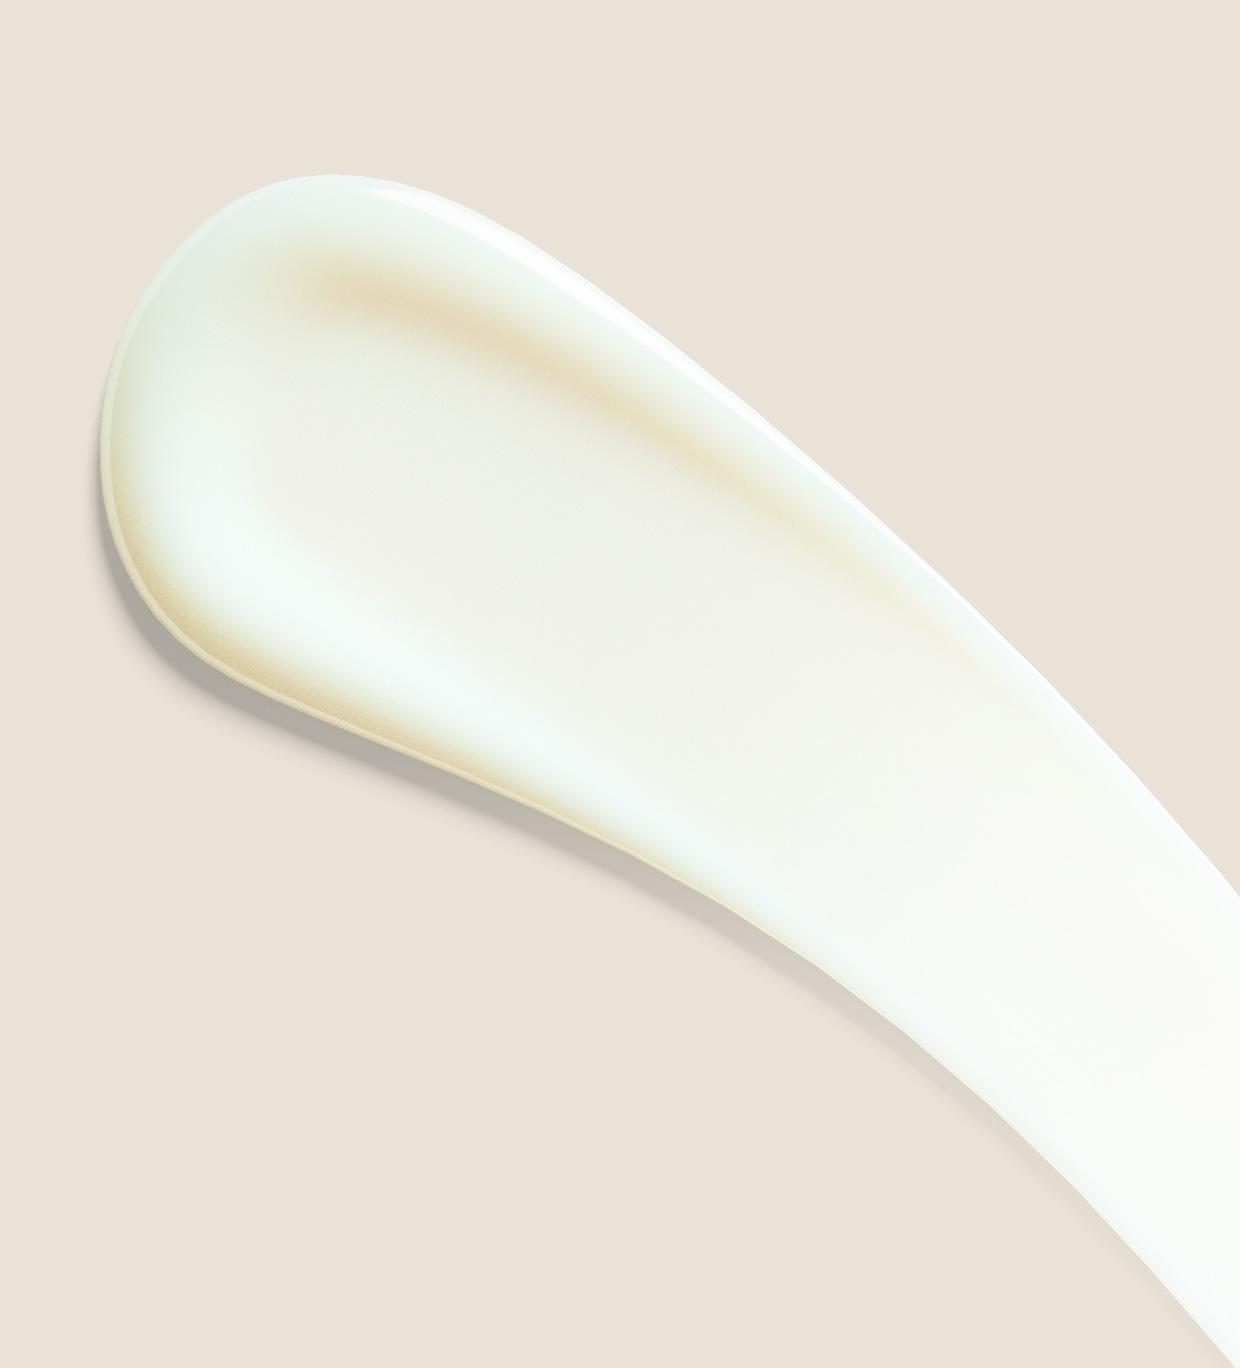 Realistic 3D visualisation of cream product